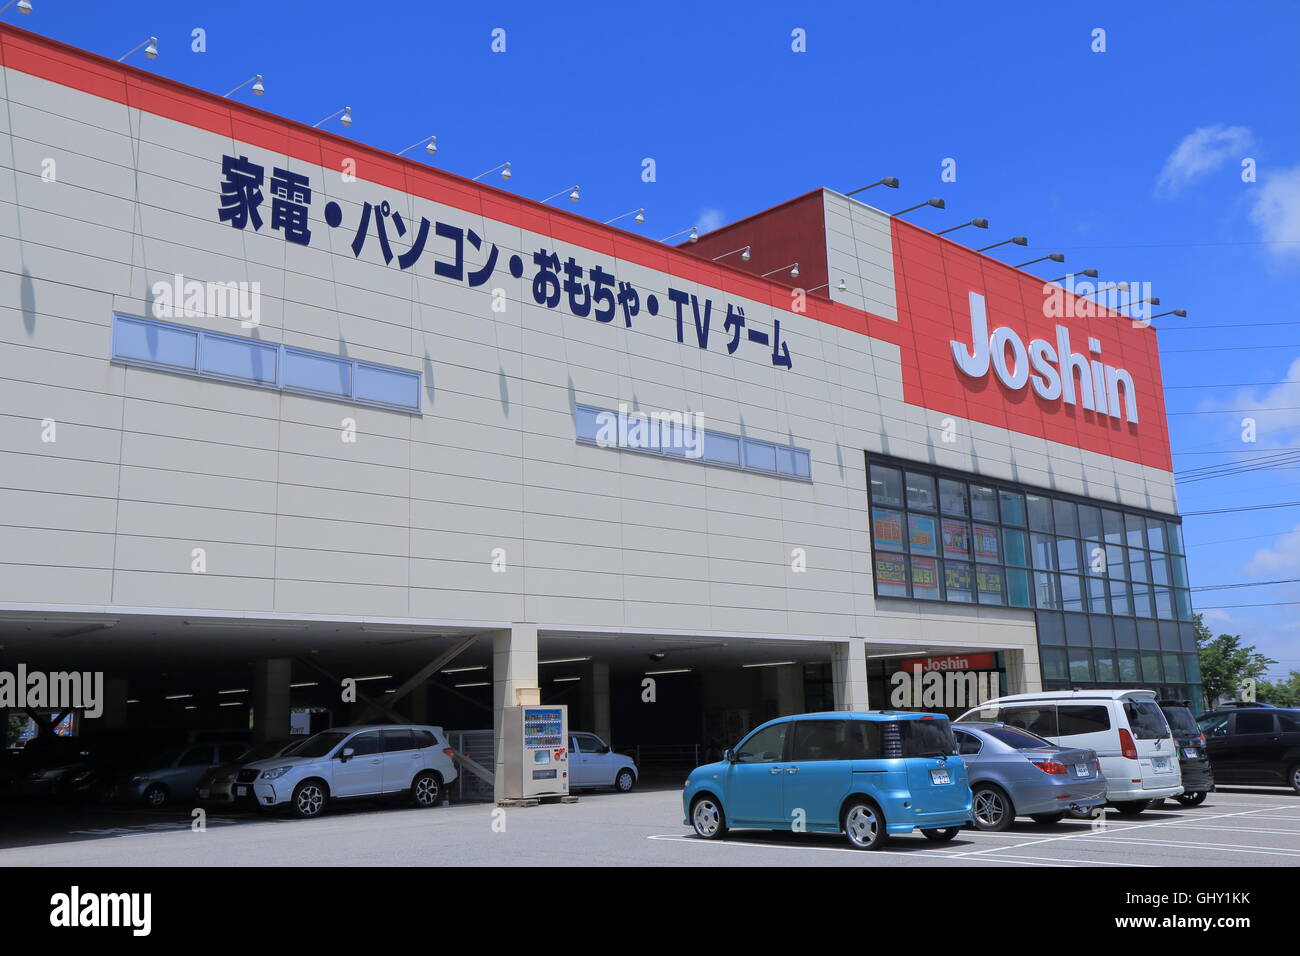 Joshin Electronics Store An Electronics Store Chain Headquartered In Osaka Founded In 1950 Stock Photo Alamy